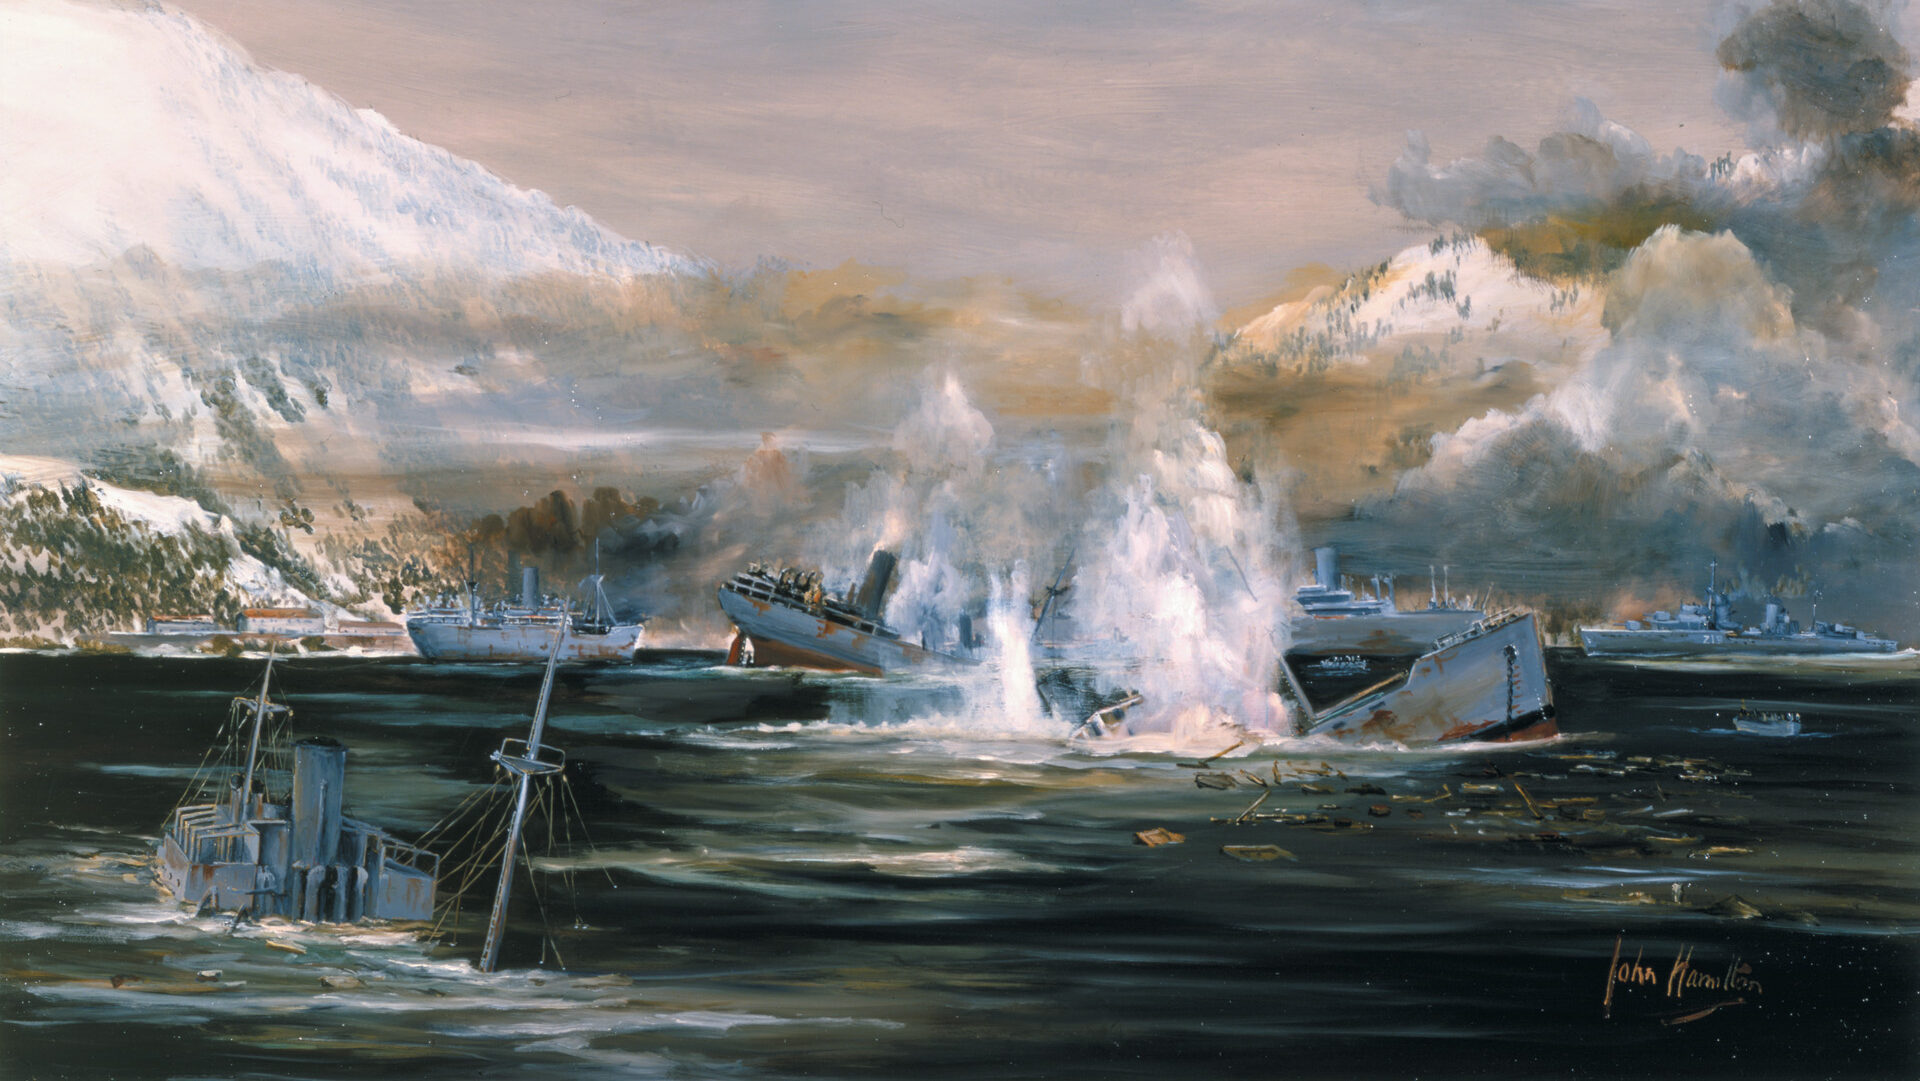 In this painting by John Hamilton, the devastation wrought in Narvik harbor by a marauding British naval squadron is readily apparent.